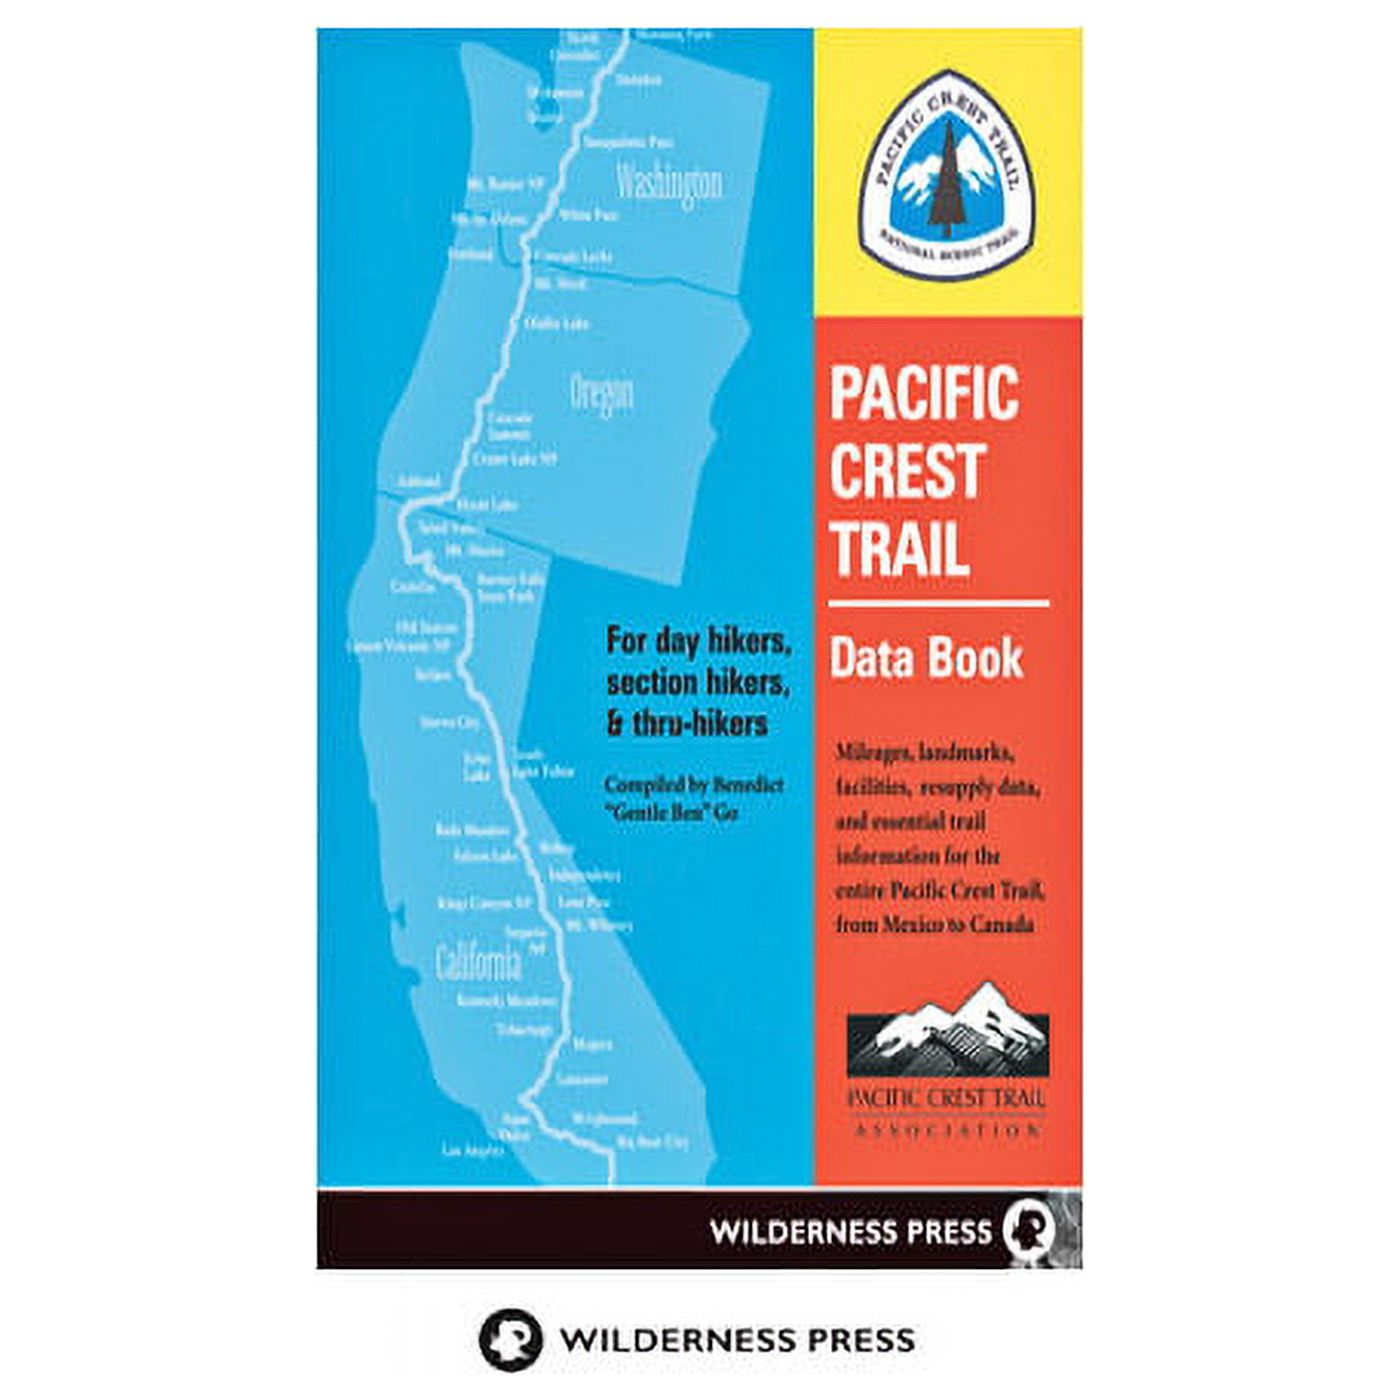 John muir trail : the essential guide to hiking america's most famous trail - paperback: 9780899977362 - image 2 of 2